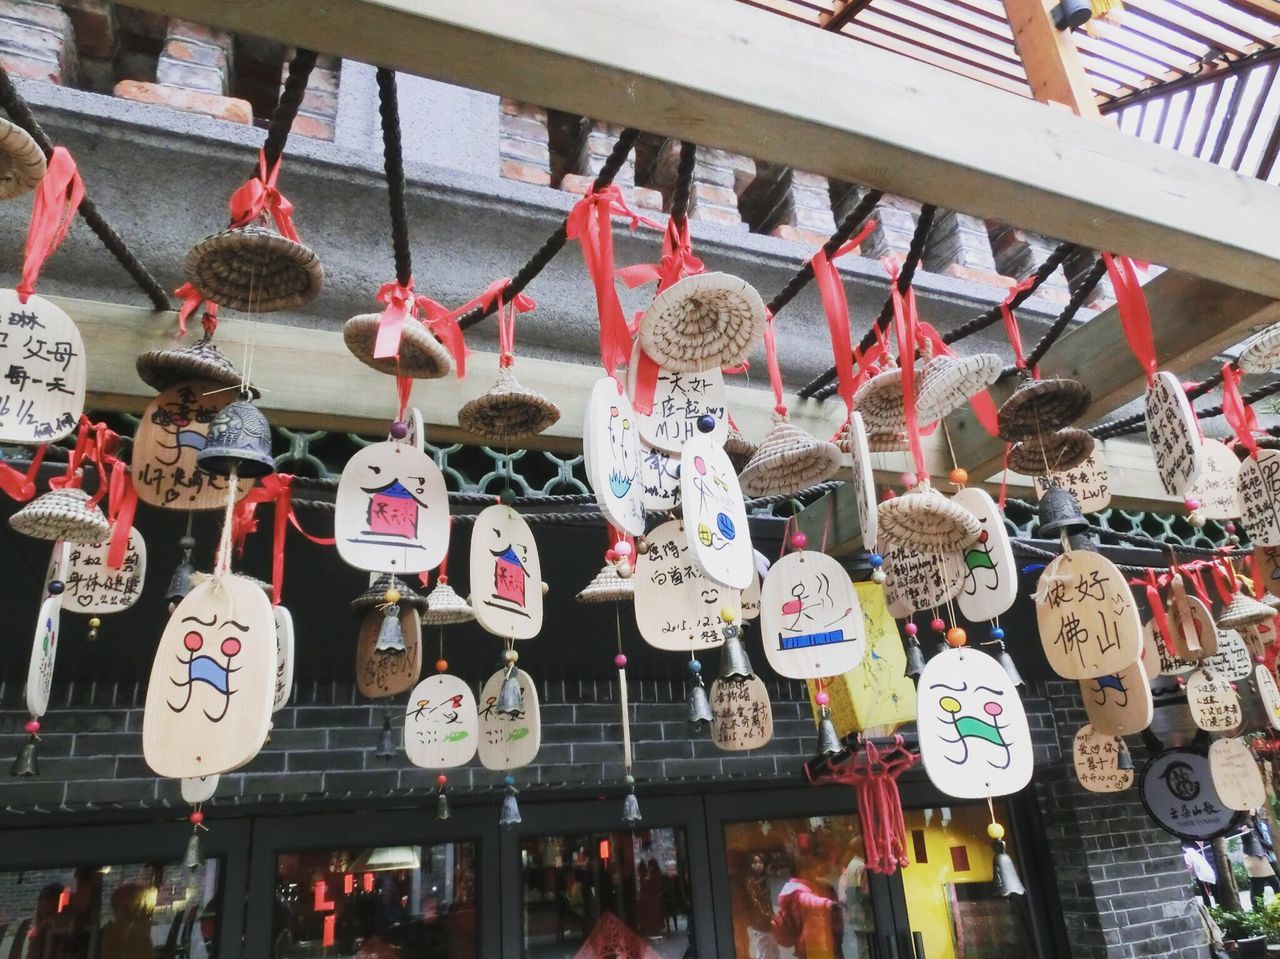 hanging, religion, spirituality, place of worship, indoors, cultures, tradition, retail, built structure, large group of objects, architecture, abundance, market, variation, decoration, for sale, in a row, lantern, culture